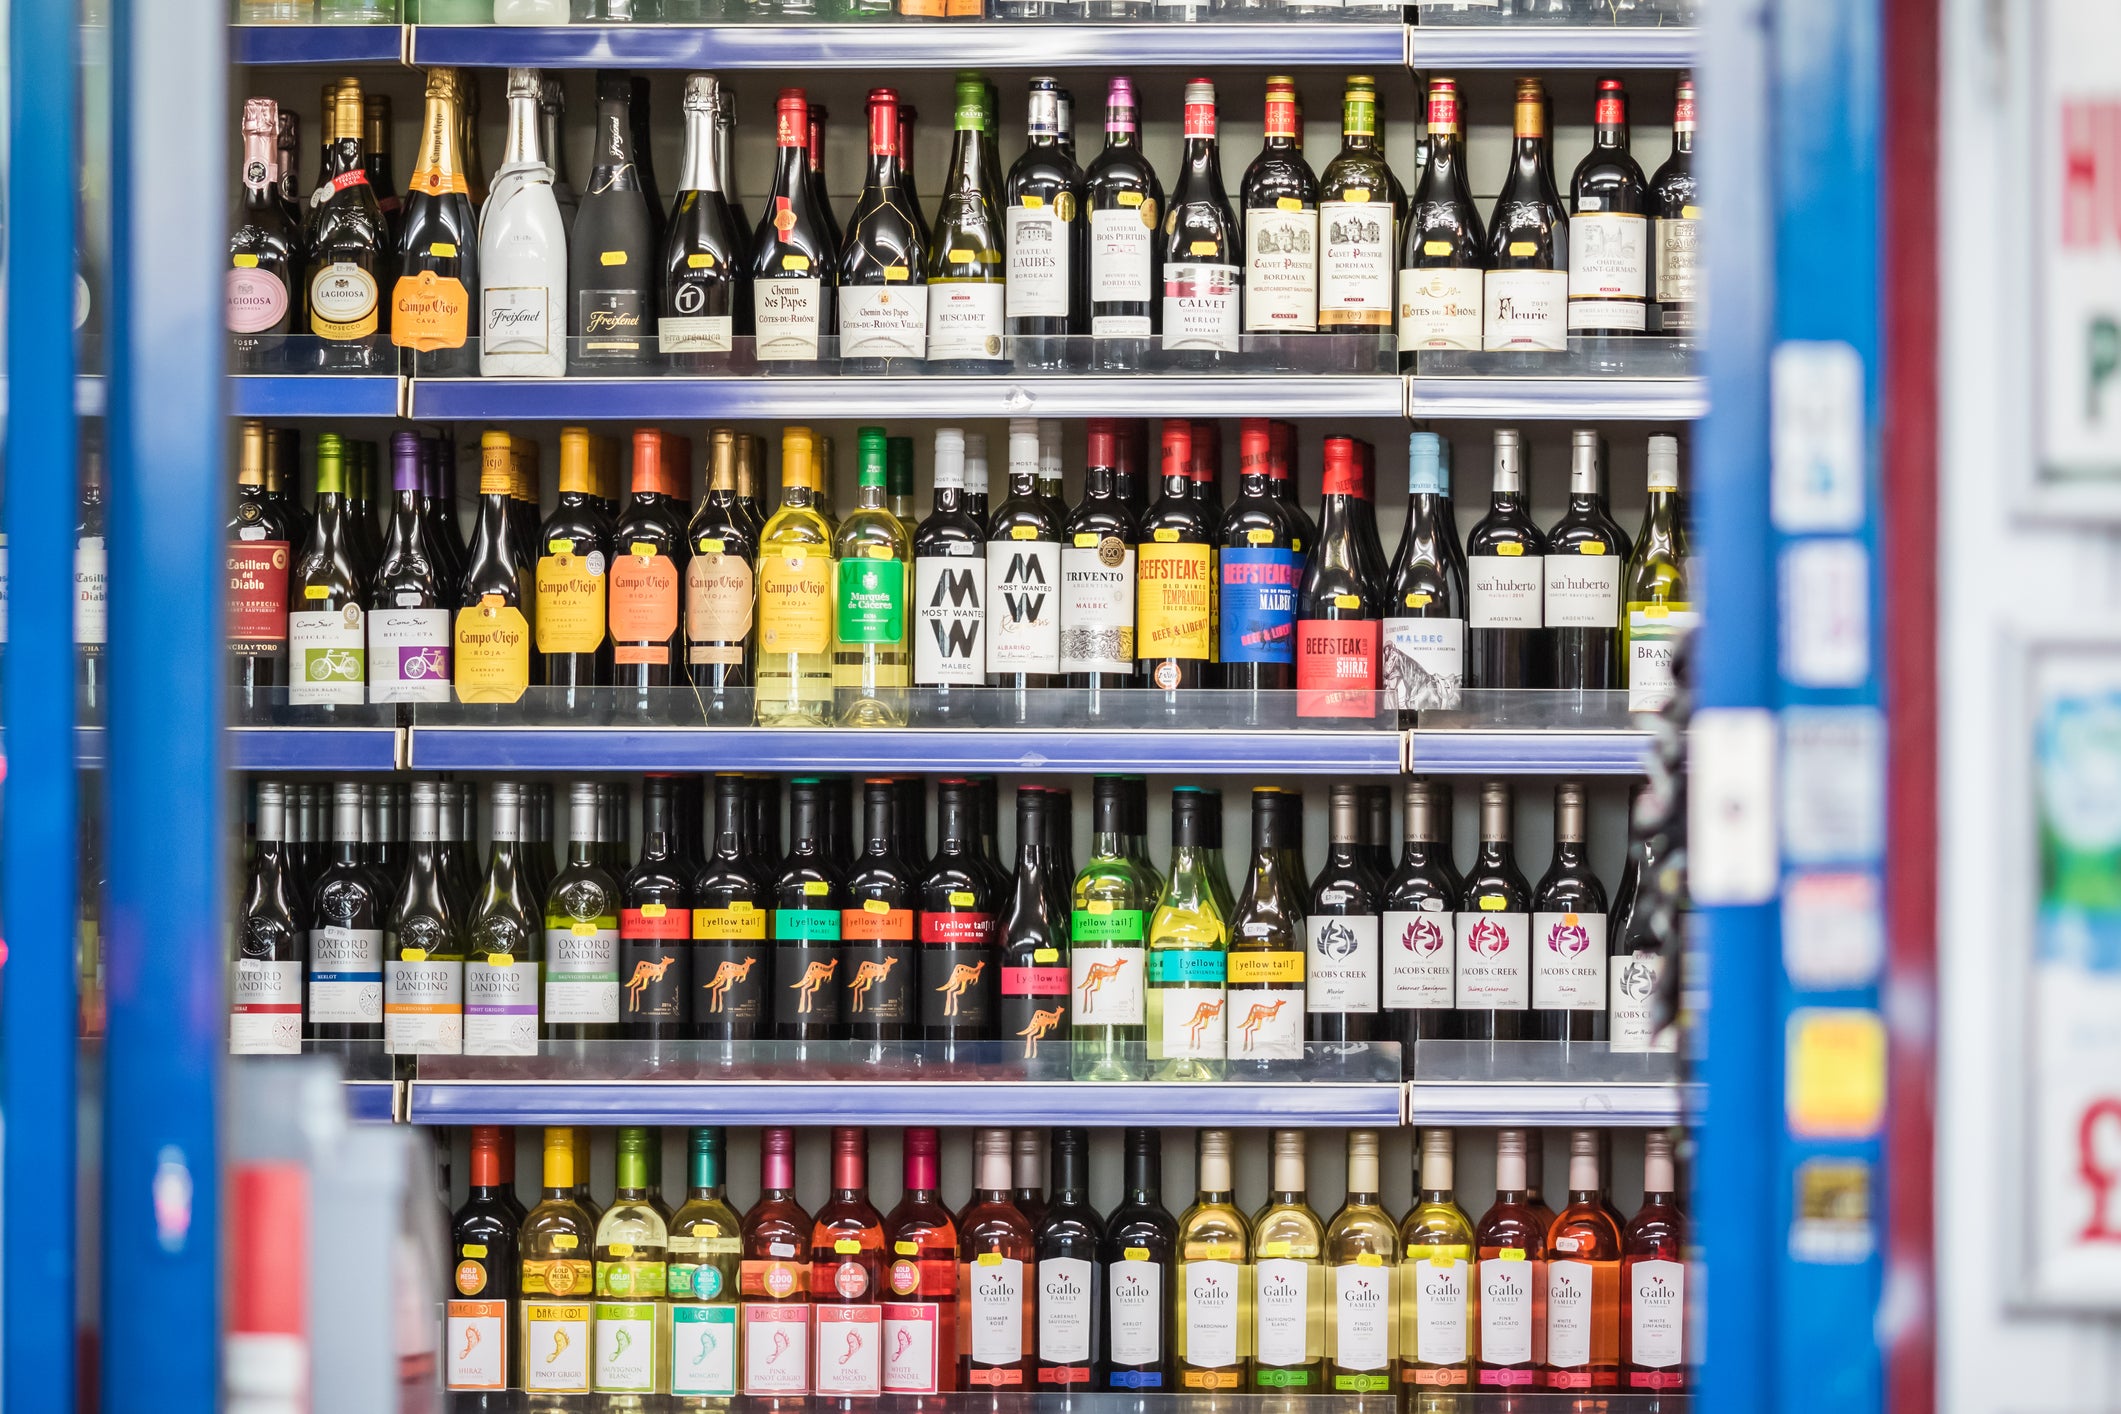 A selection of wines displayed on shelf in an off-licence shop